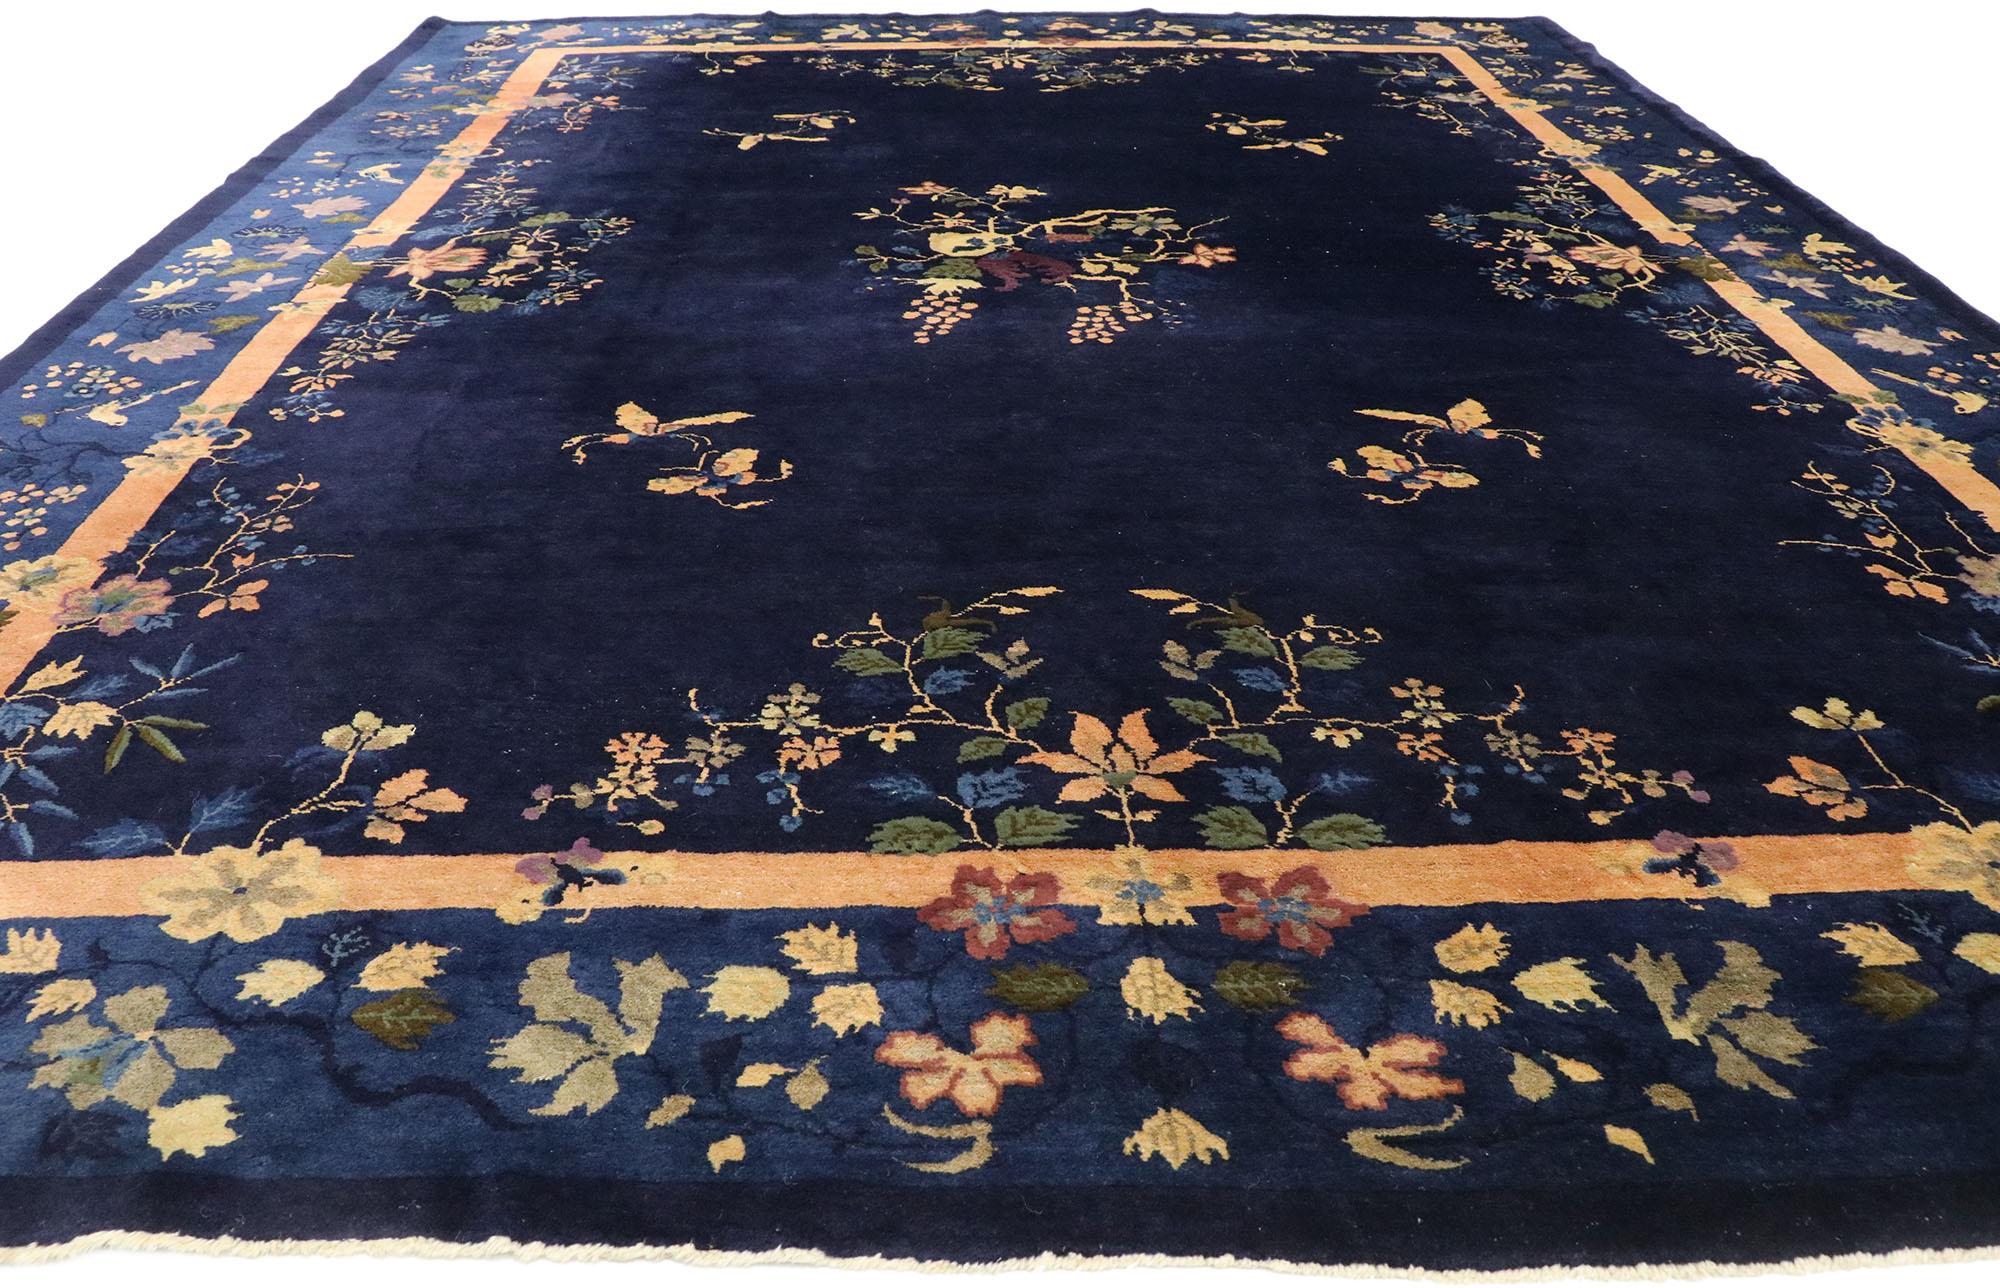 Hand-Knotted Antique Chinese Peking Rug with Art Deco Style Inspired by Walter Nichols